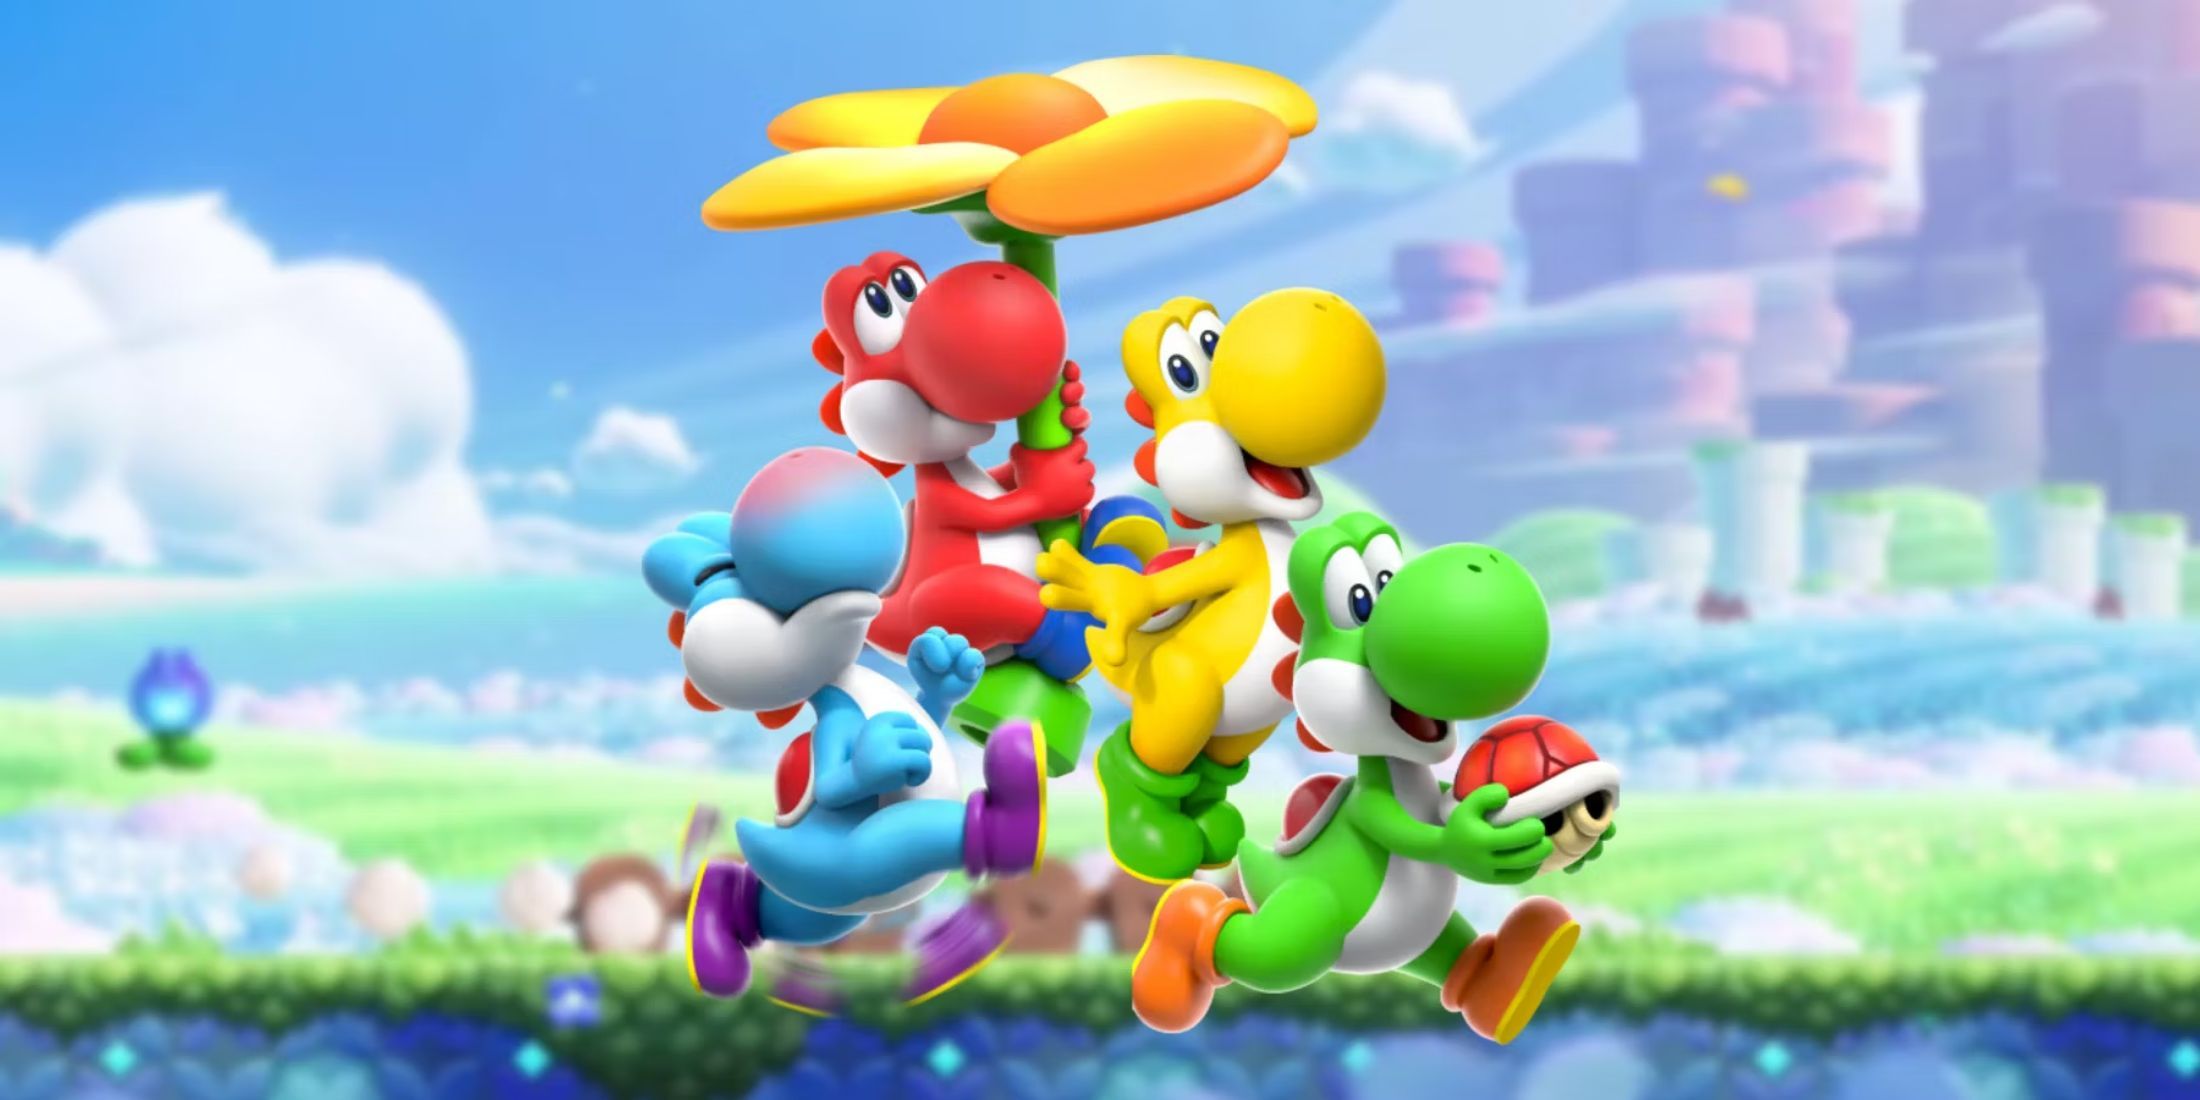 Four different colored Yoshis under a flower umbrella